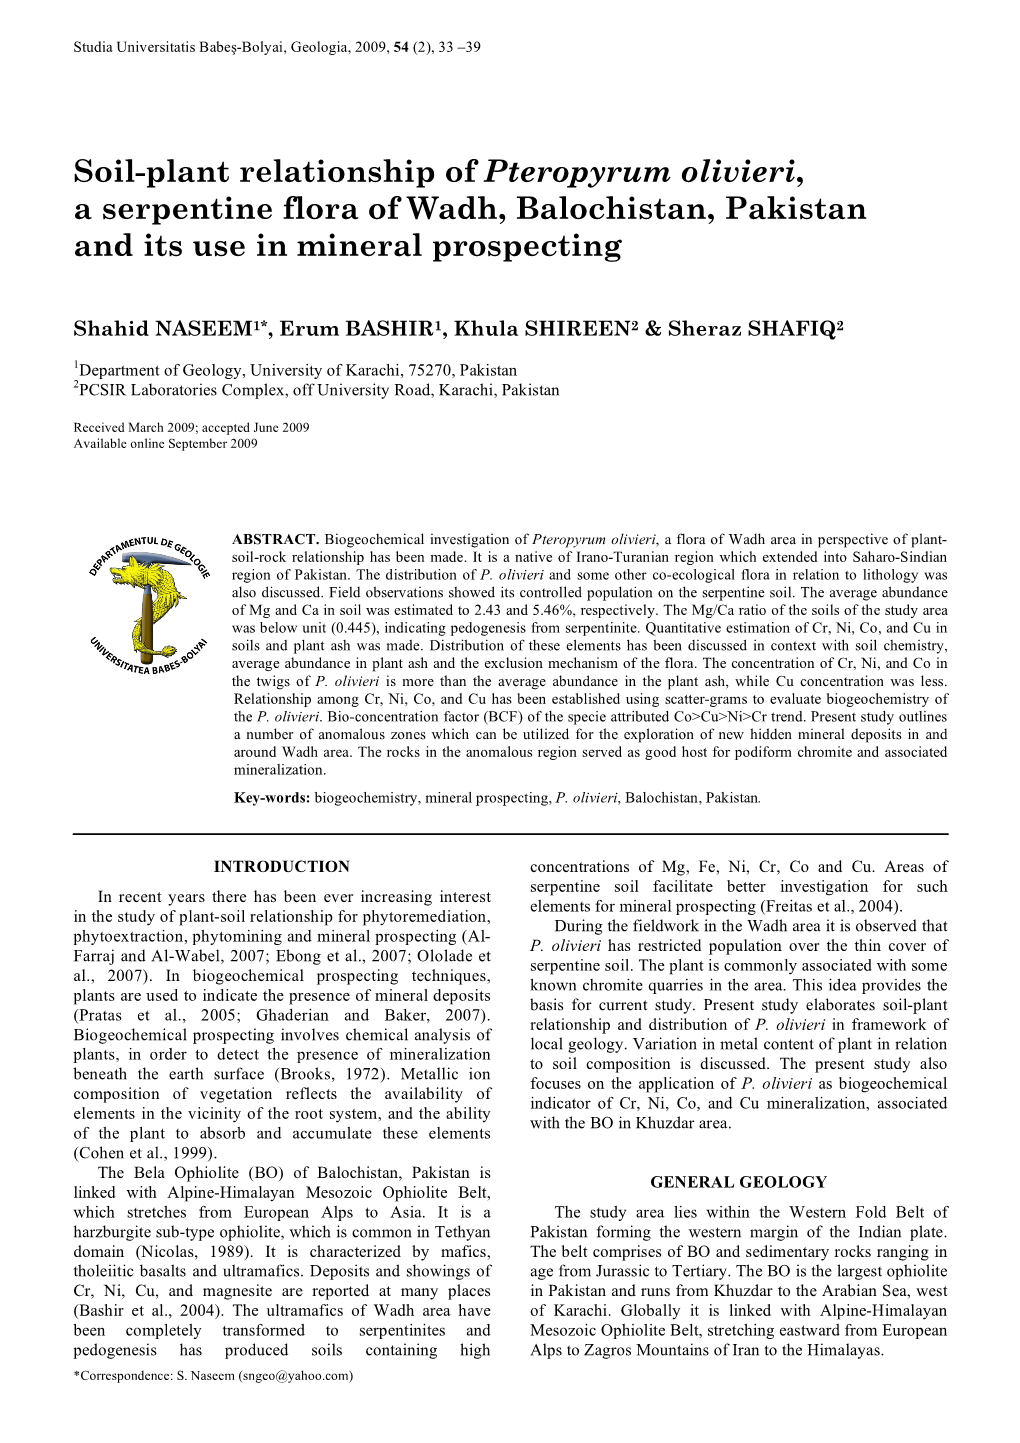 Soil-Plant Relationship of Pteropyrum Olivieri, a Serpentine Flora of Wadh, Balochistan, Pakistan and Its Use in Mineral Prospecting